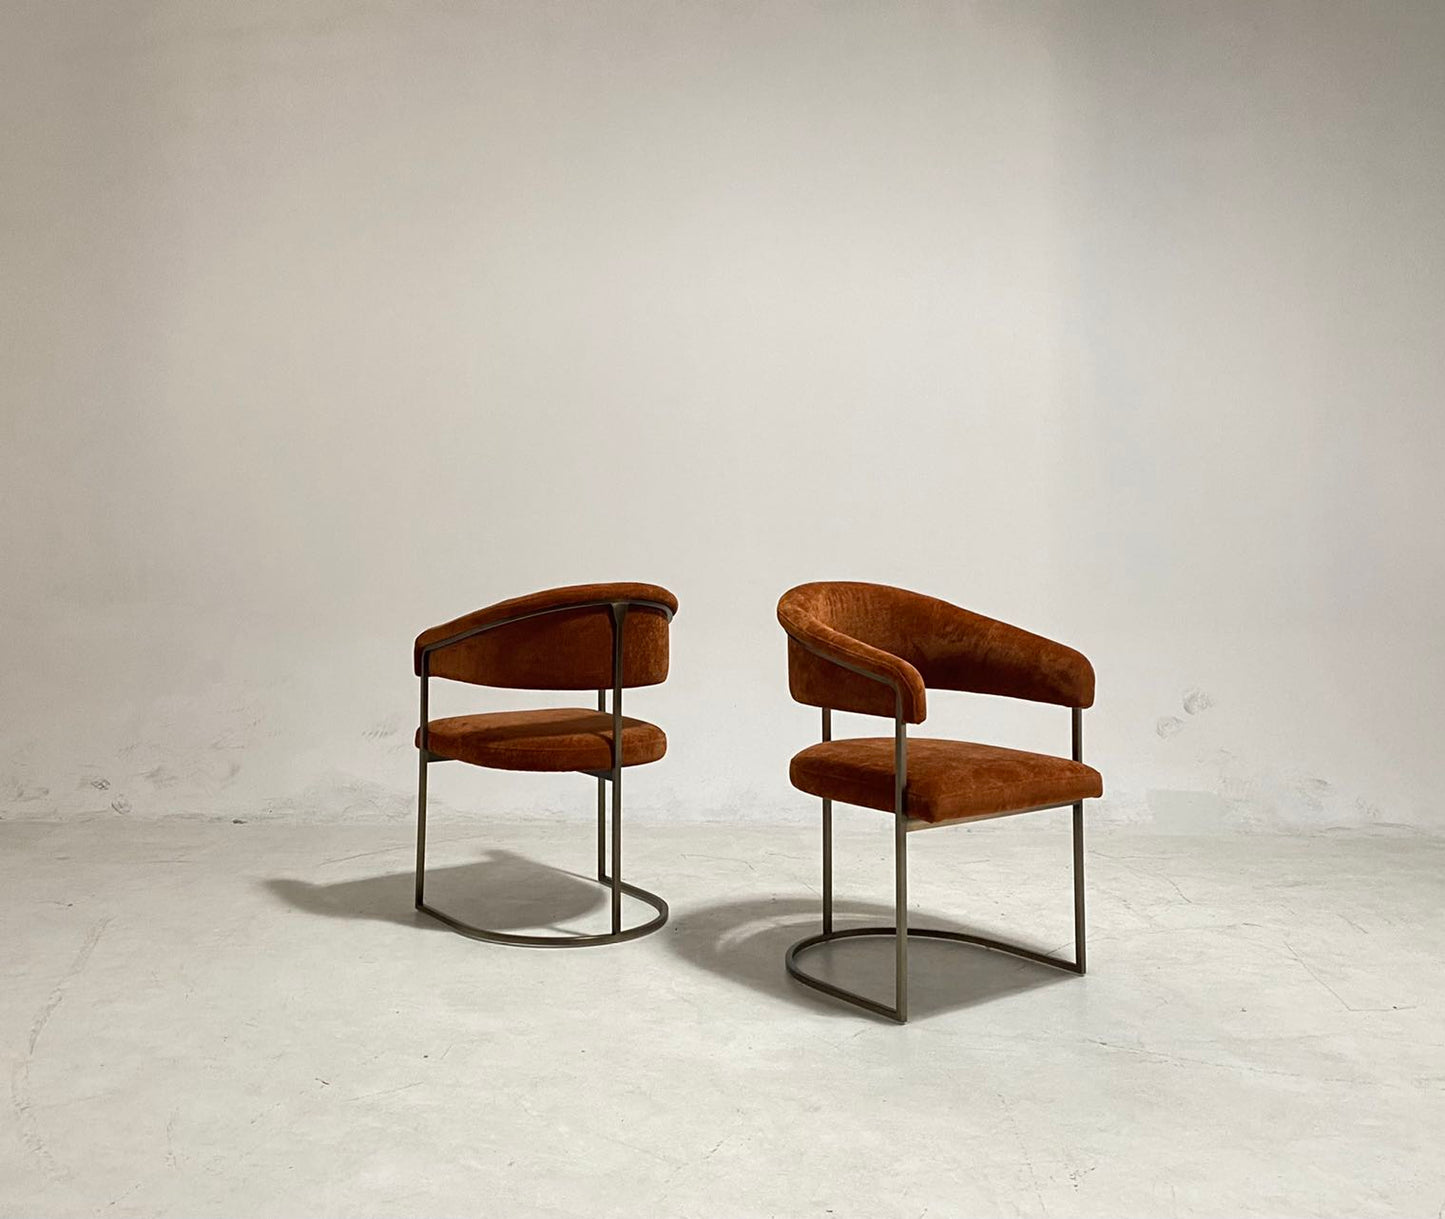 Visionnaire Clem Dining Chair